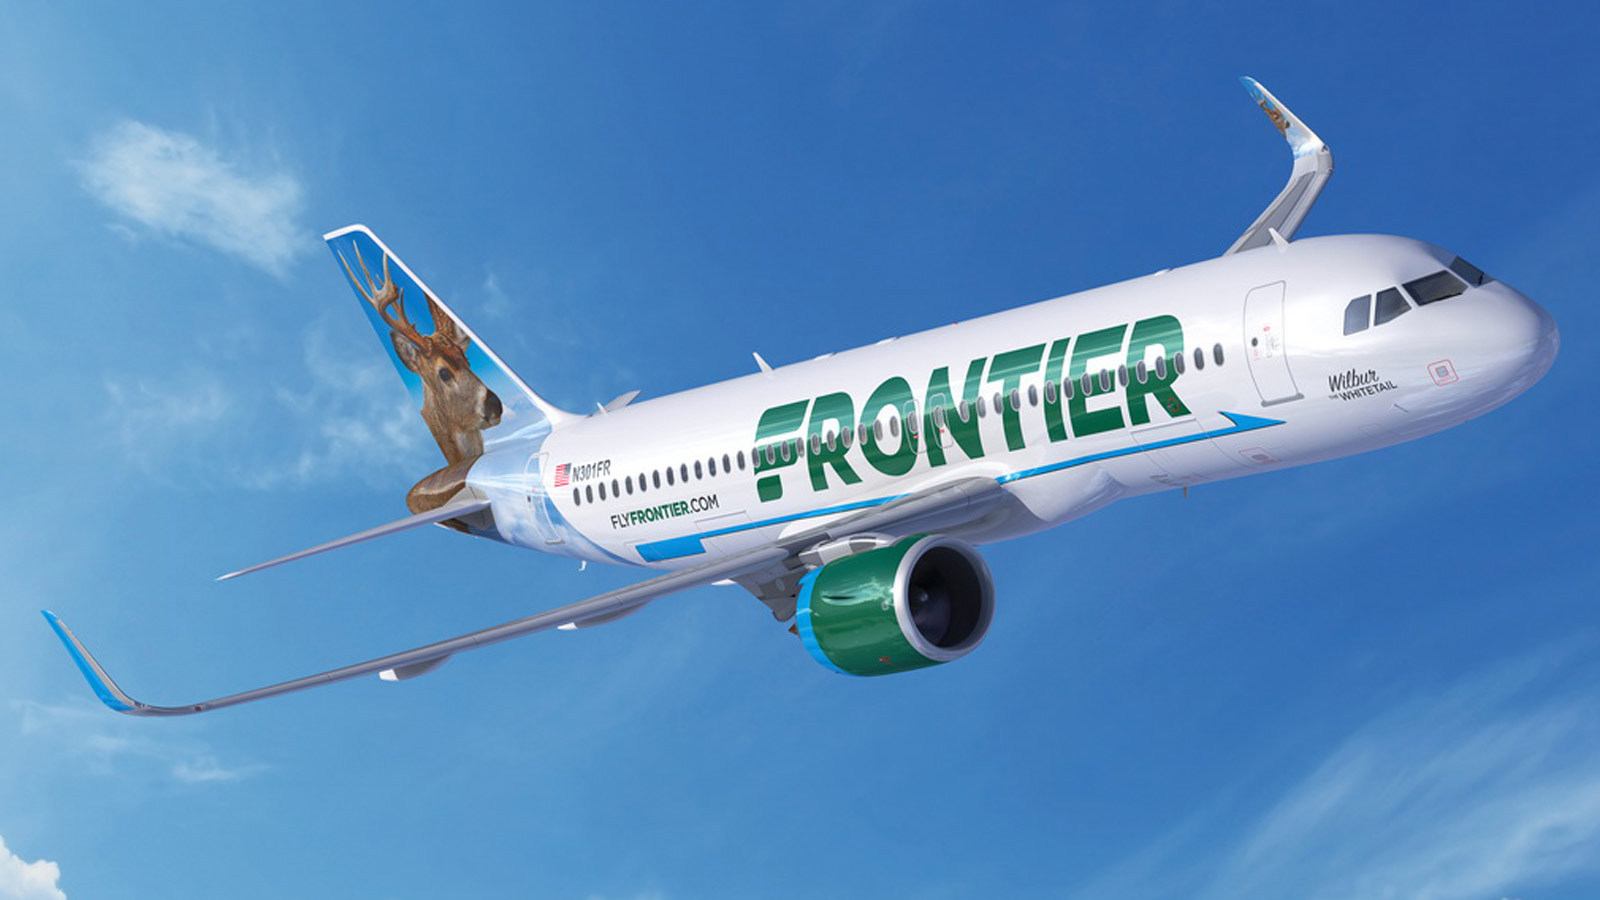 Company-provided photo of a Frontier Airlines airplane in the sky...